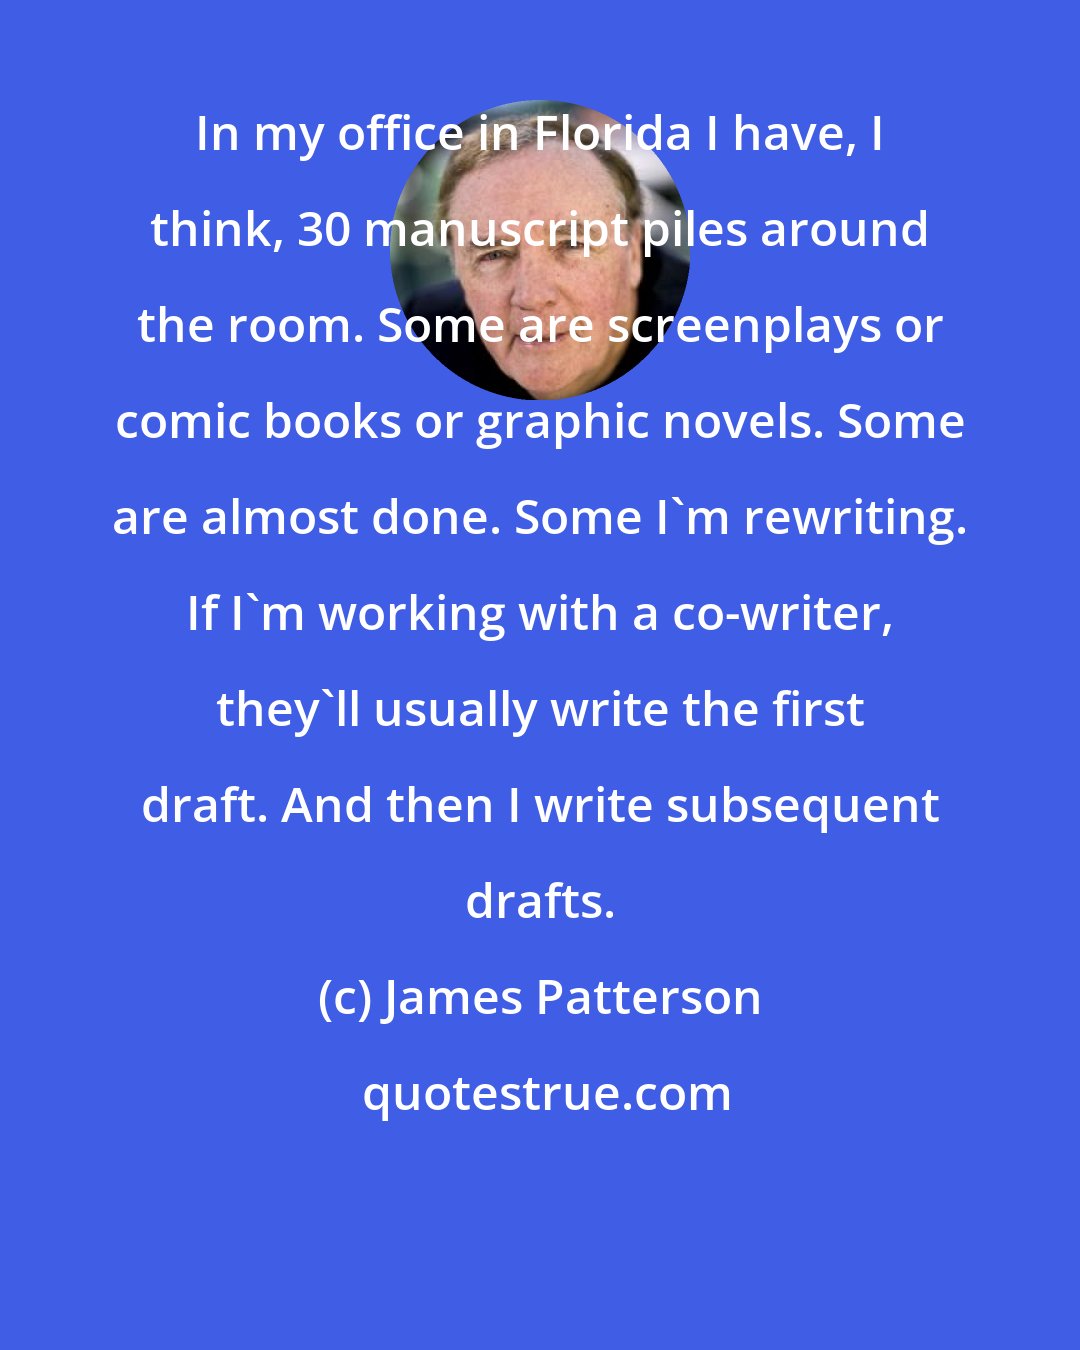 James Patterson: In my office in Florida I have, I think, 30 manuscript piles around the room. Some are screenplays or comic books or graphic novels. Some are almost done. Some I'm rewriting. If I'm working with a co-writer, they'll usually write the first draft. And then I write subsequent drafts.